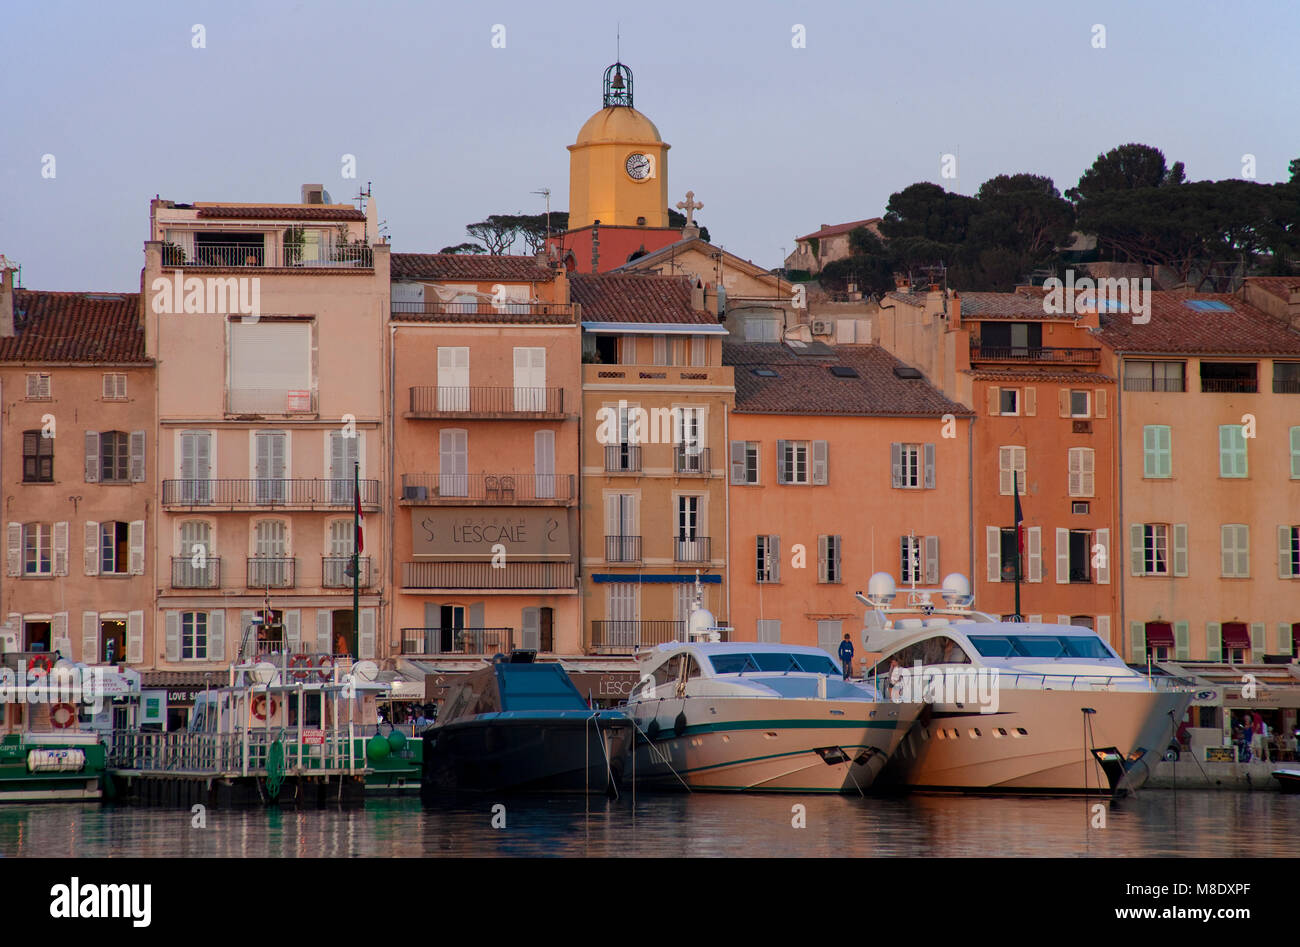 Evening mood at harbour of Saint-Tropez, luxury yachts at mooring, behind the strolling promenade, french riviera, South France, Cote d'Azur, France Stock Photo